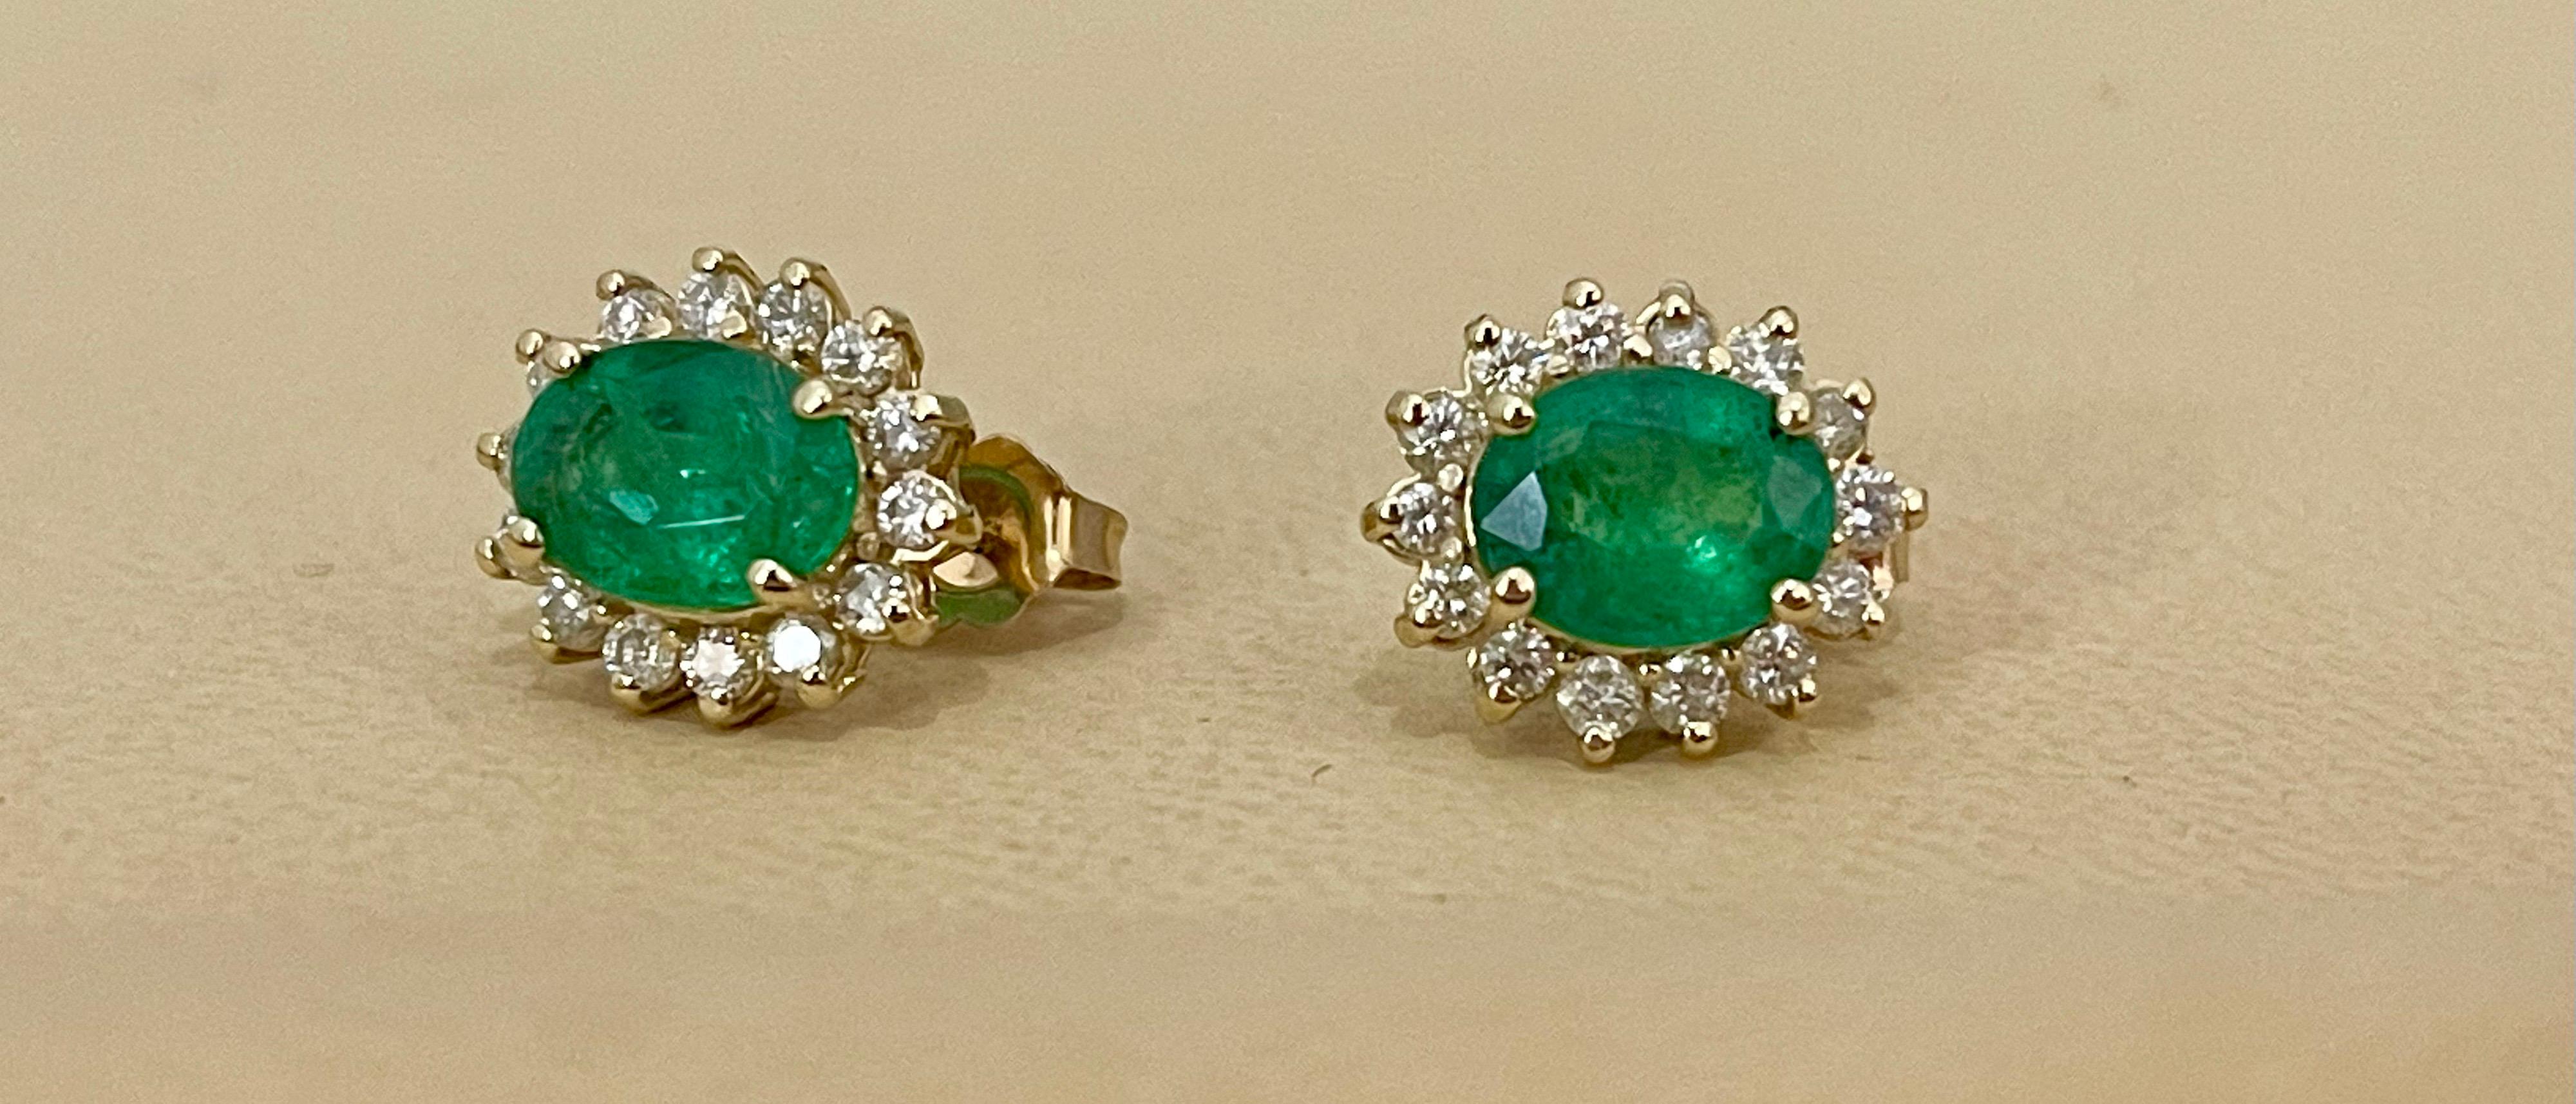 4 Ct Oval Shape Emerald & 1.5 Ct Diamond Post Back Earrings 14 Karat Yellow Gold In New Condition For Sale In New York, NY